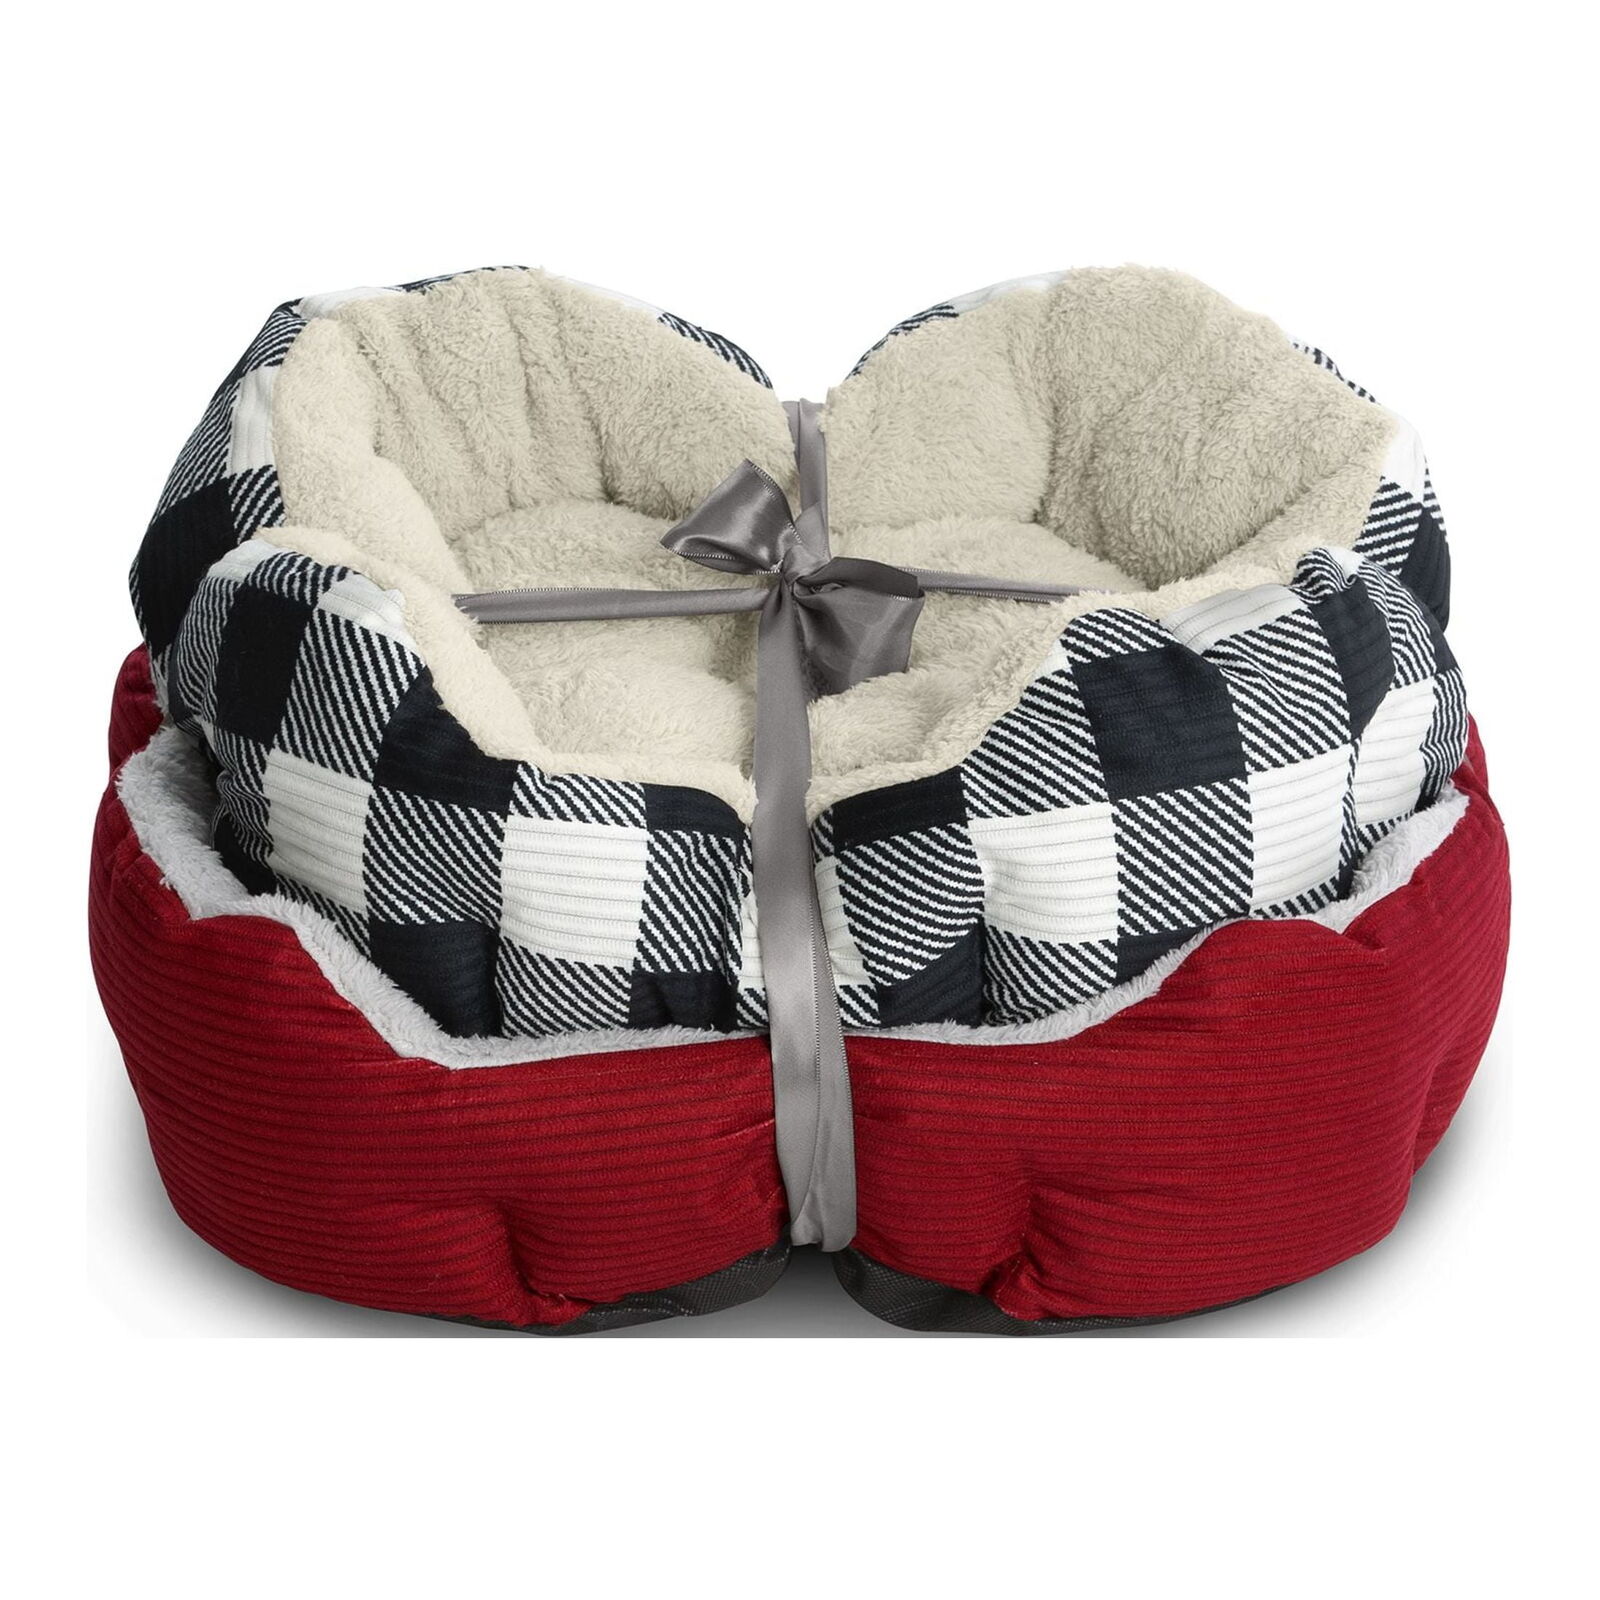 Vibrant Life Cuddler Small Cat/Dog Bed Gift Set, Red and Black/WhiteBuffaloPlaid